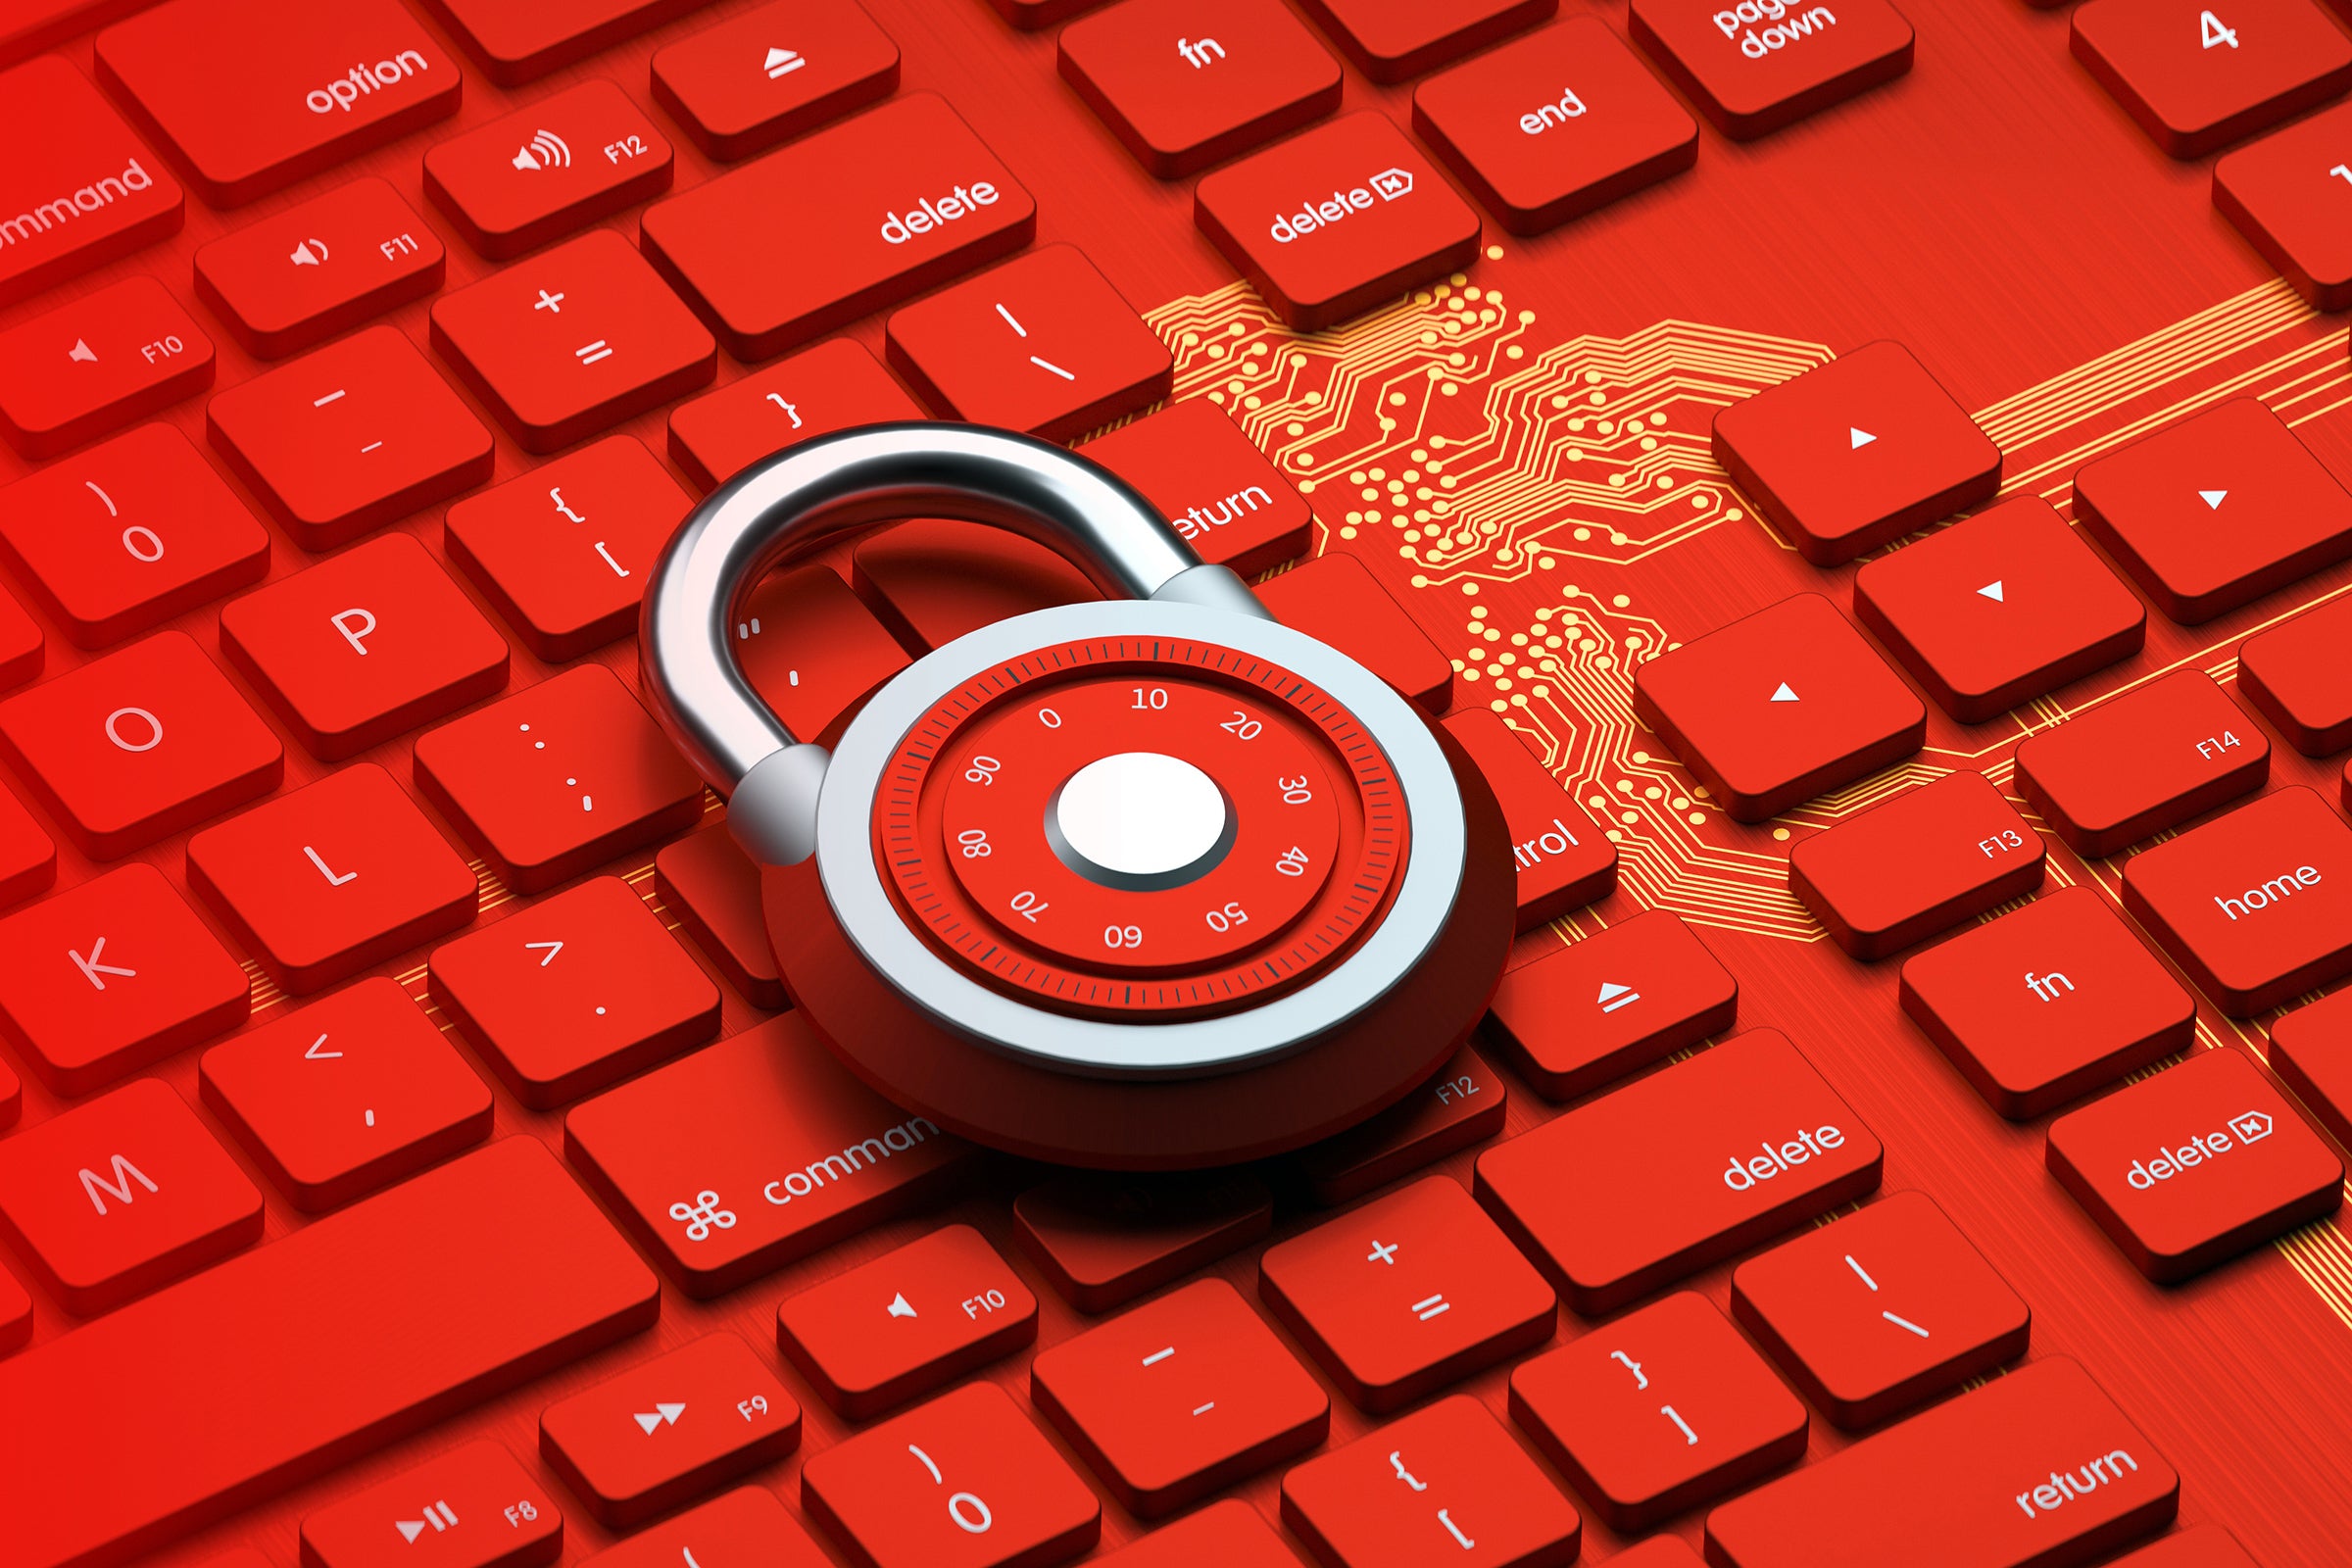 cybersecurity_padlock_on_keyboard_and_circuit_background_by_gocmen_gettyimages-1182849319_2400x1600-100859329-orig